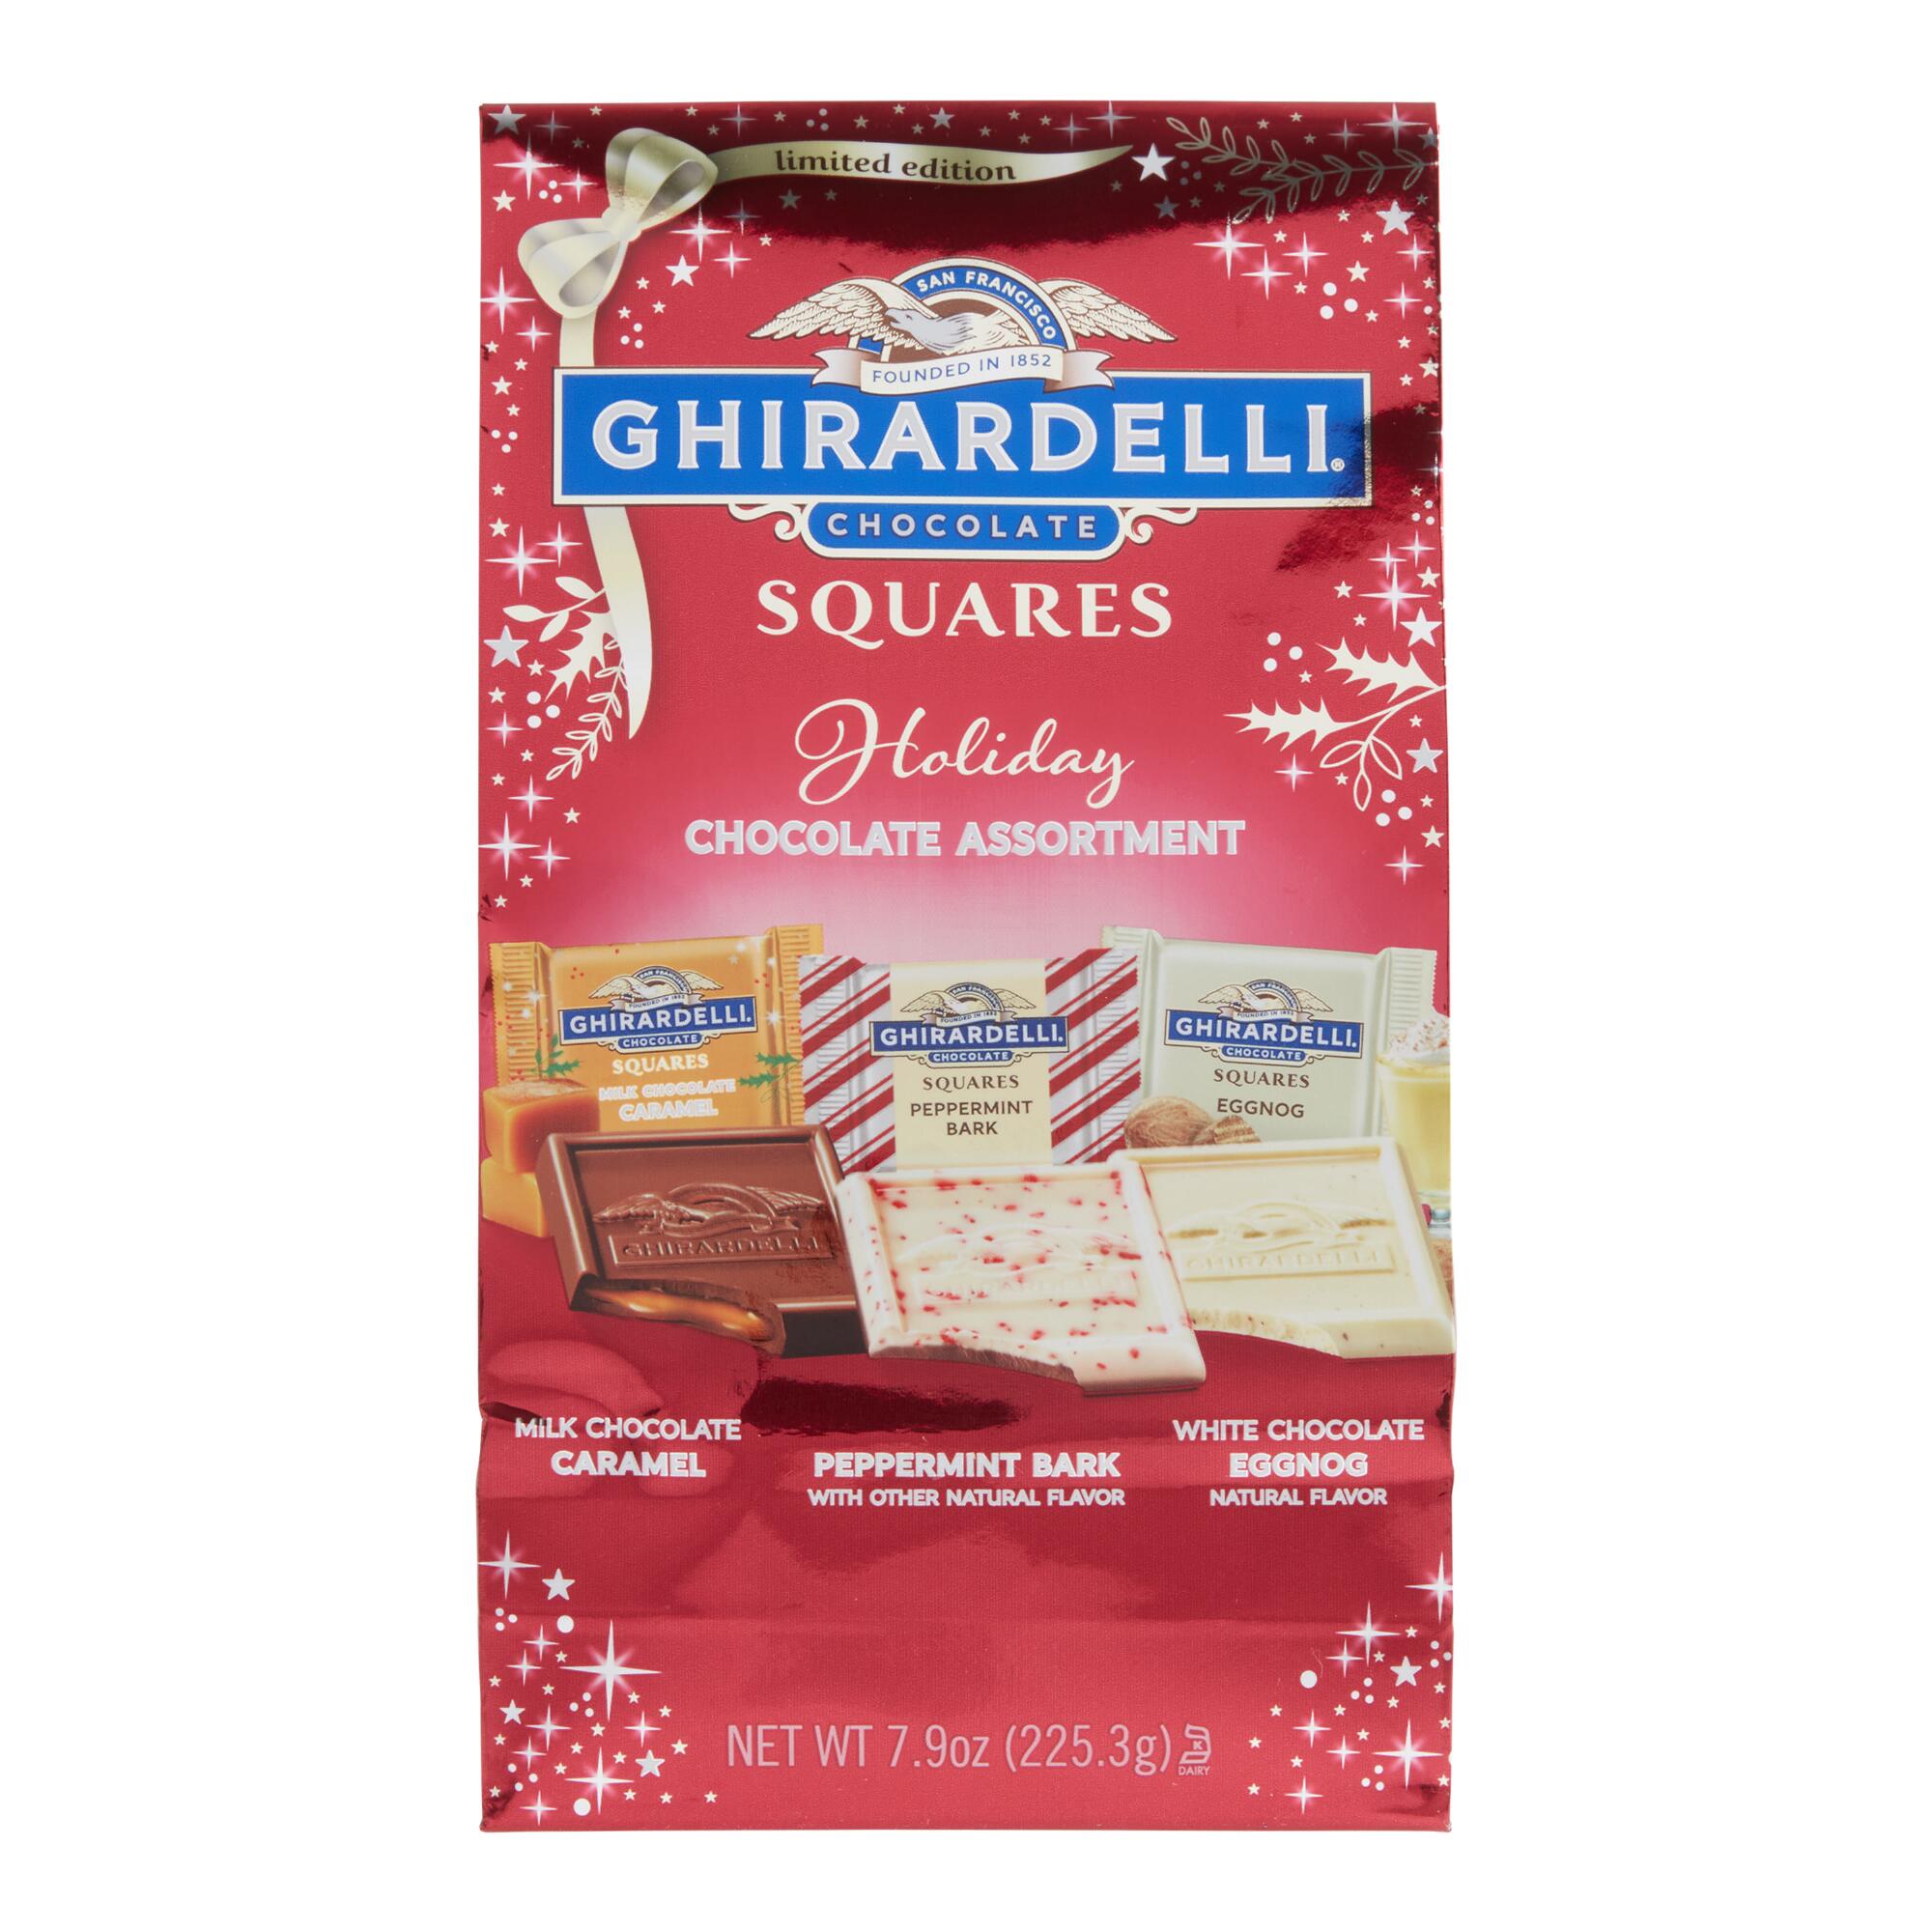 Ghirardelli Chocolate Squares Holiday Assortment Bag by World Market